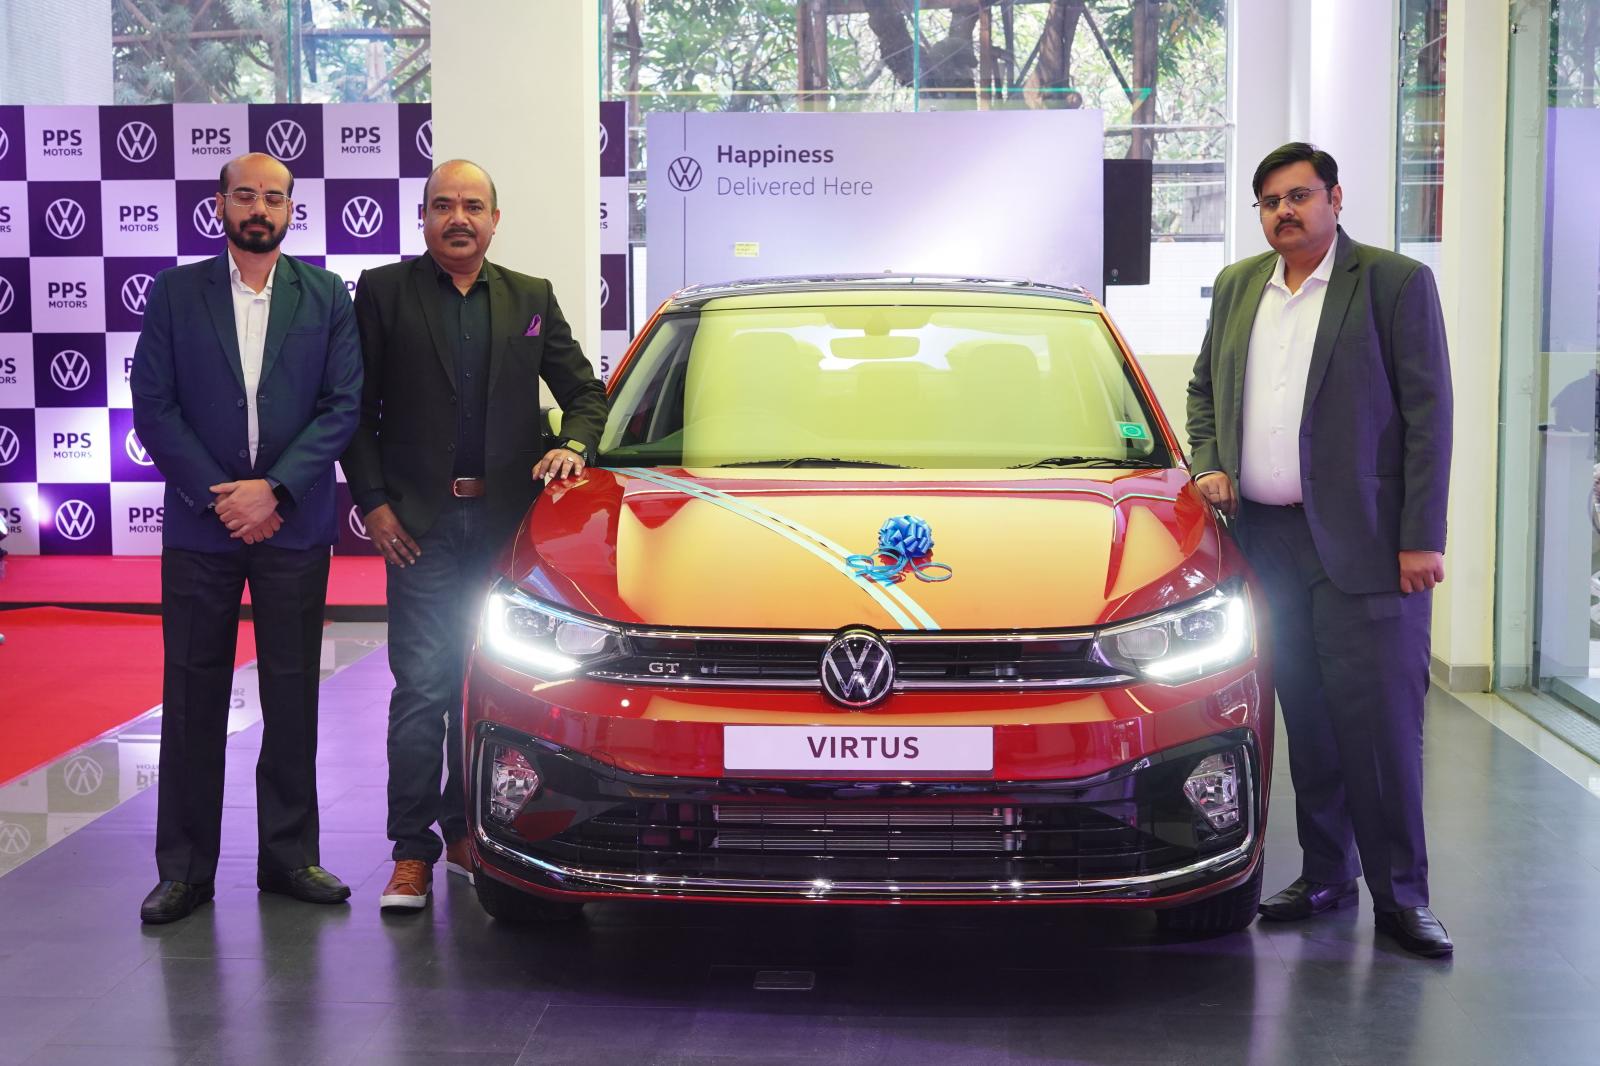 VW India Strengthens its Presence in Kolkata, Opens 2 New Touchpoints